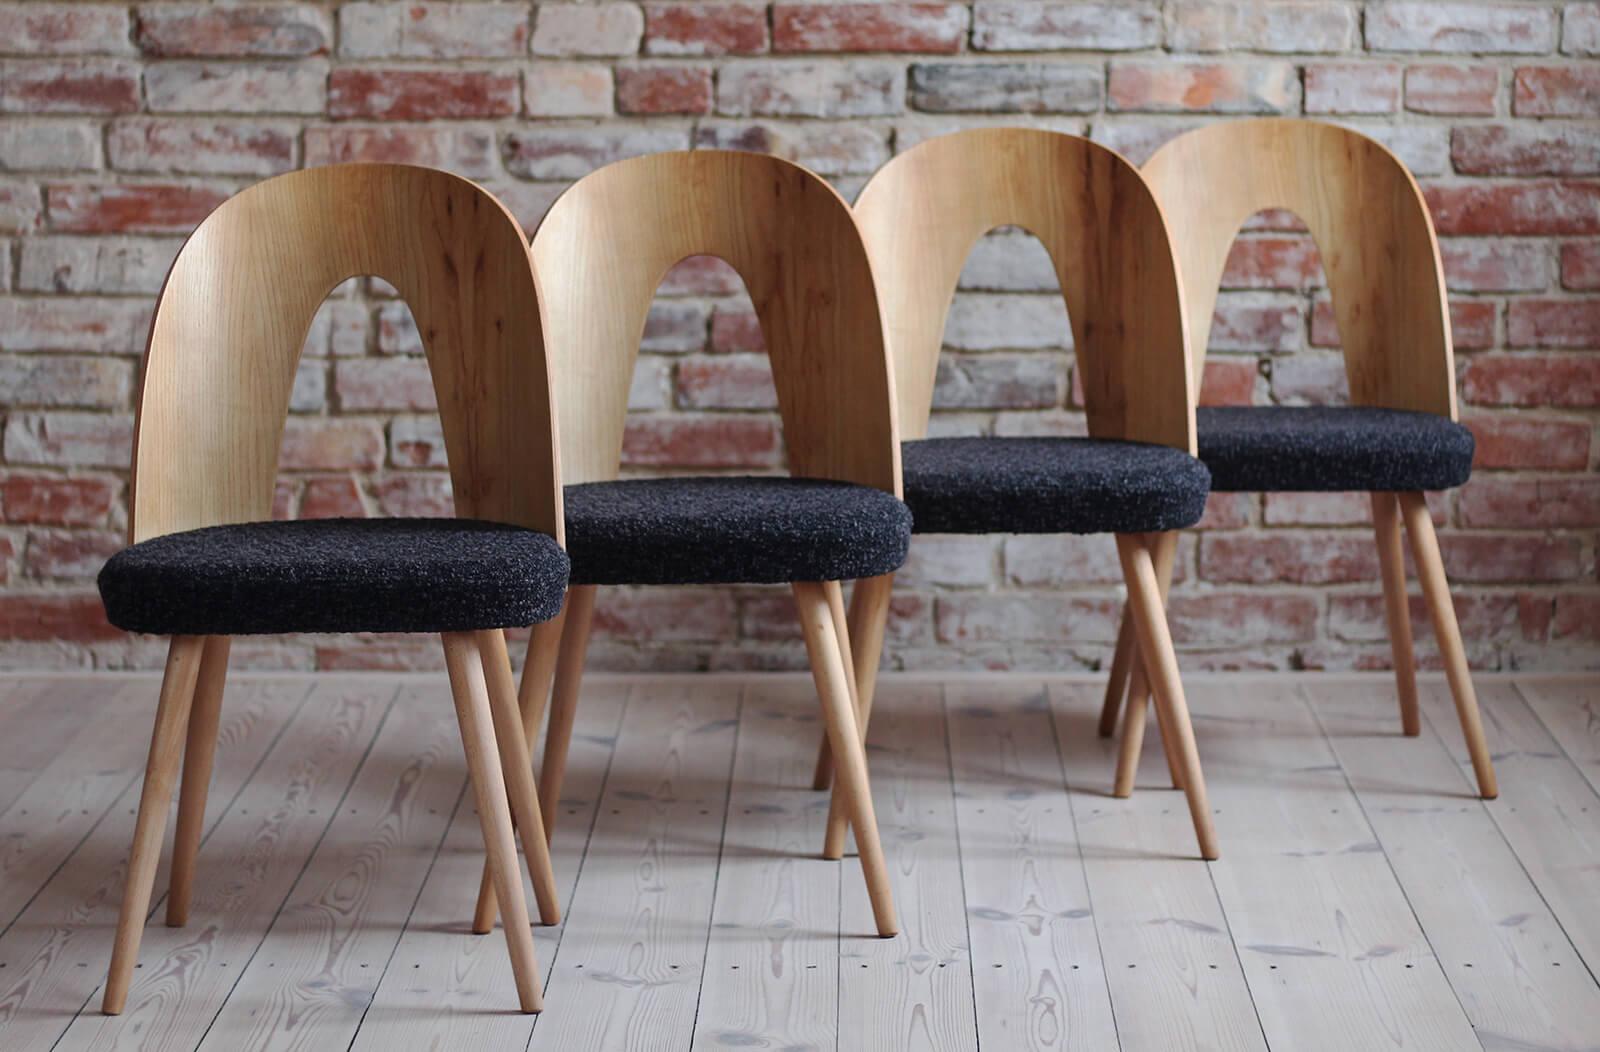 Czech Set of 4 Mid-Century Dining Chairs by a. Šuman, Reupholstered in Black Boucle